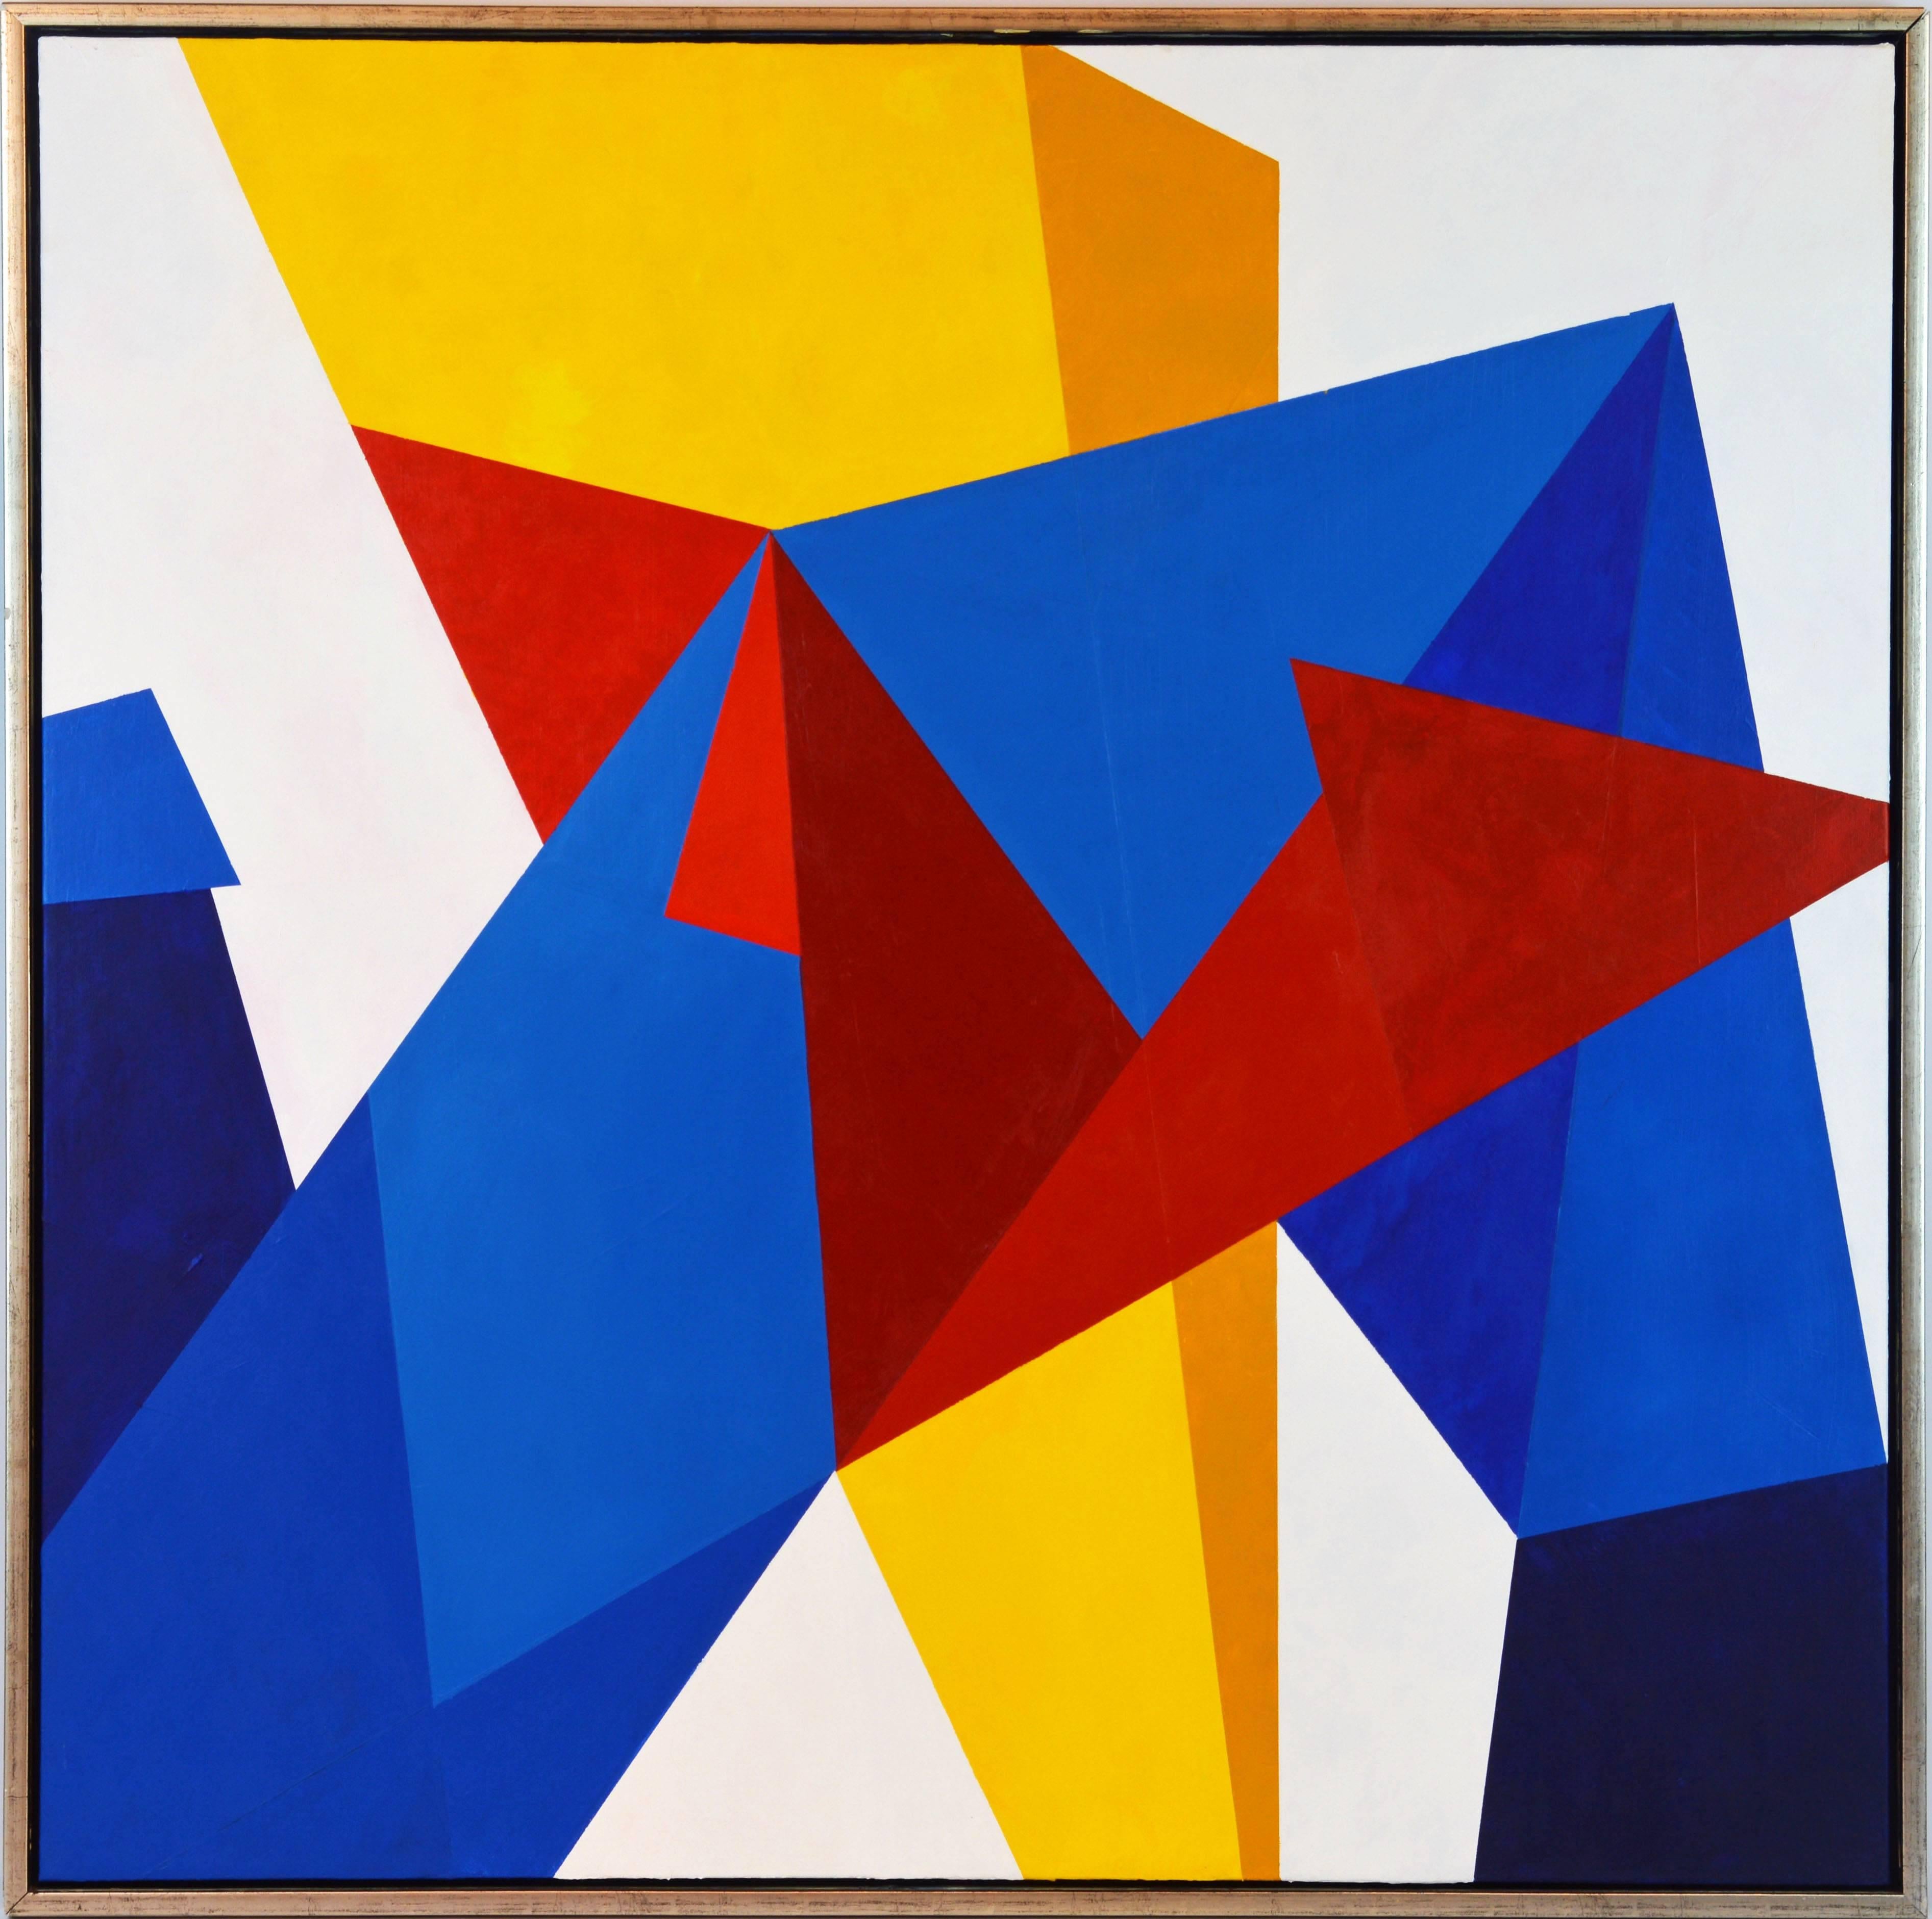 'Color Composition'
by Anders Hegelund, Danish b. 1938.
Acrylic on canvas. Measures: 39.5 x 39.5 without frame, 41 x 41 including frame, signed, dated and titled on the back.
Housed in a Minimalist style silver finish floater frame.

Anders